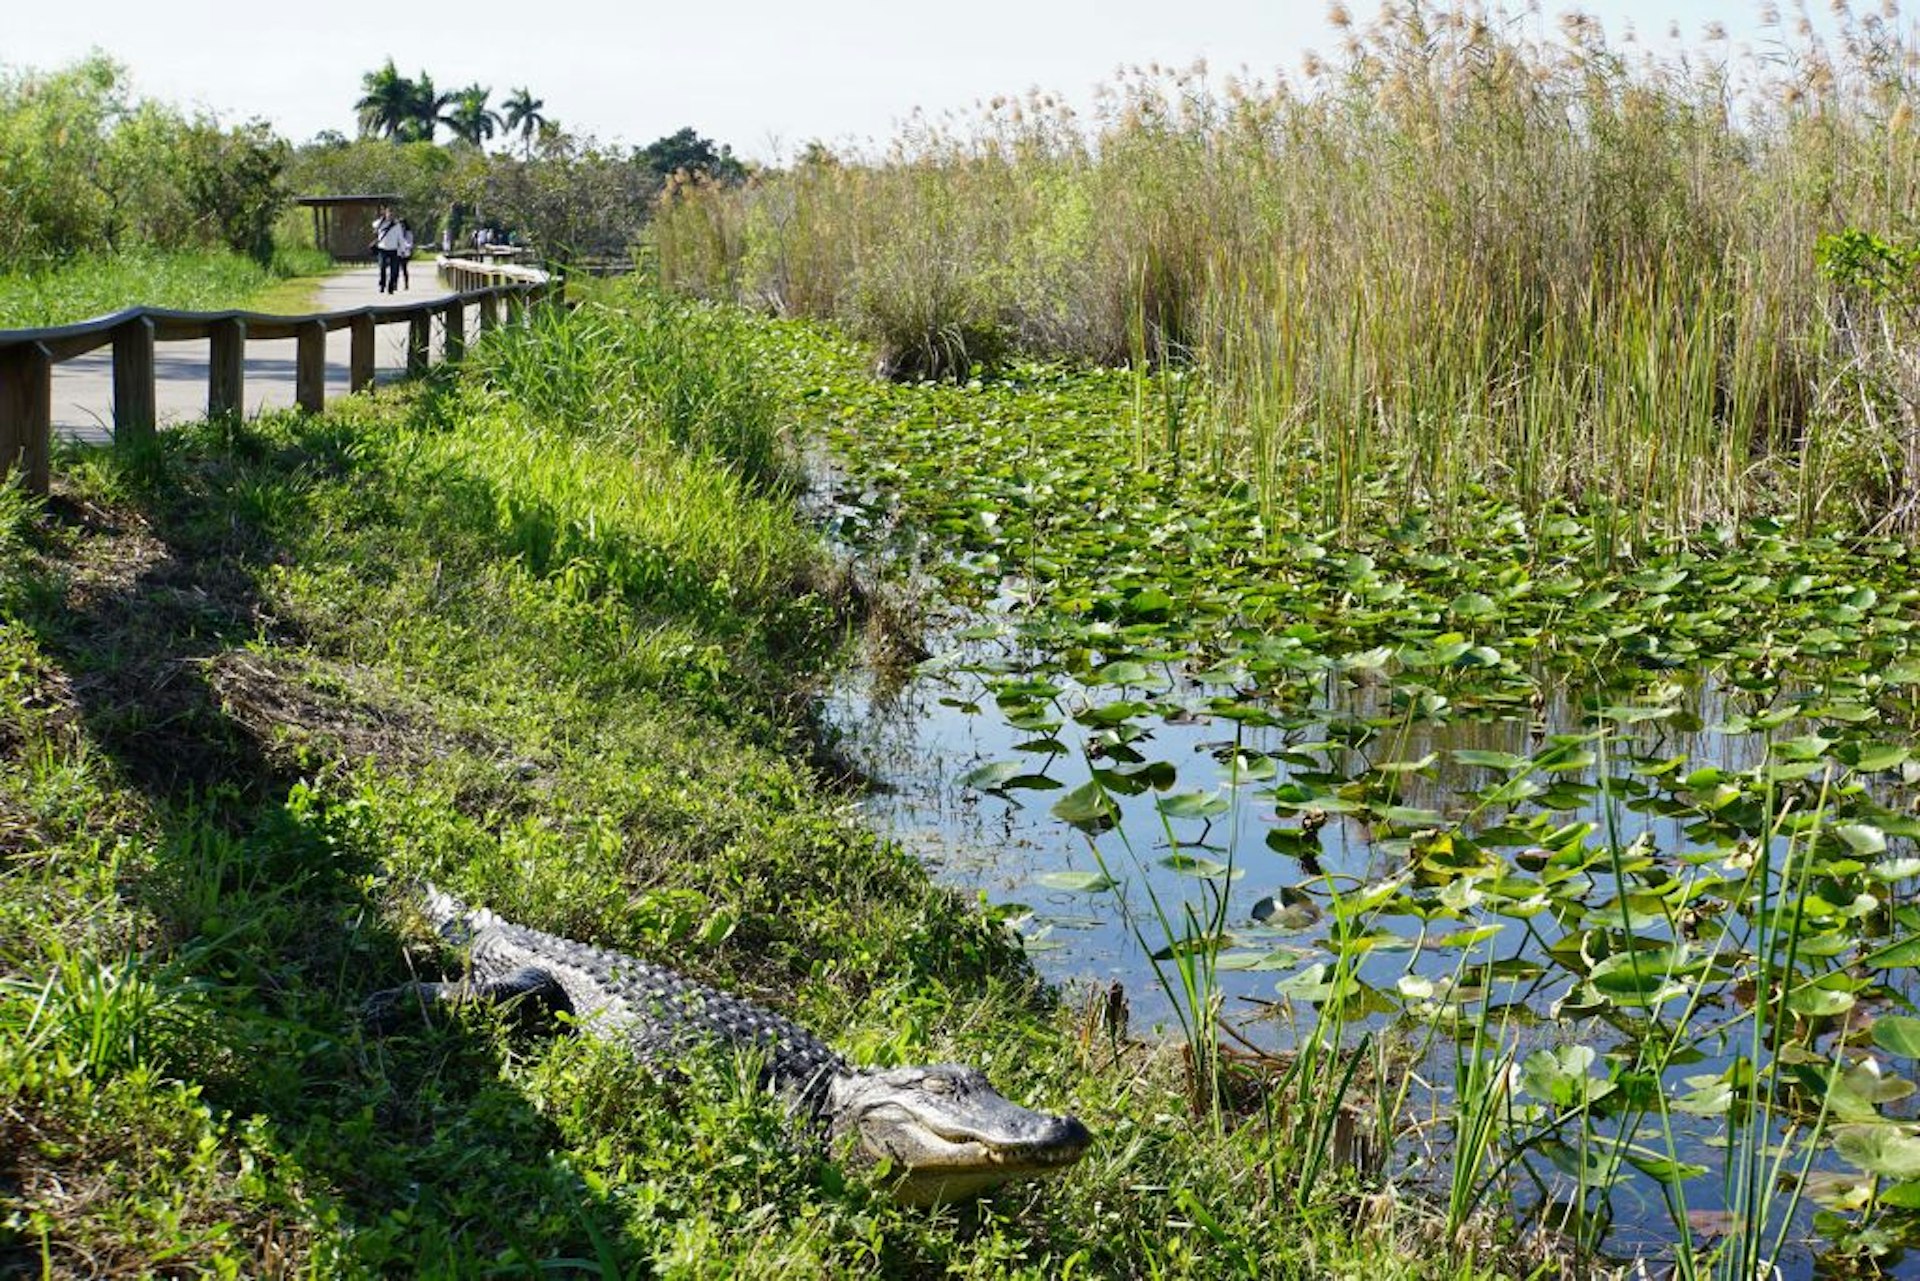 Visitors walk near a Florida alligator on a boardwalk on the Anhinga Trail in Everglades National Park in Homestead